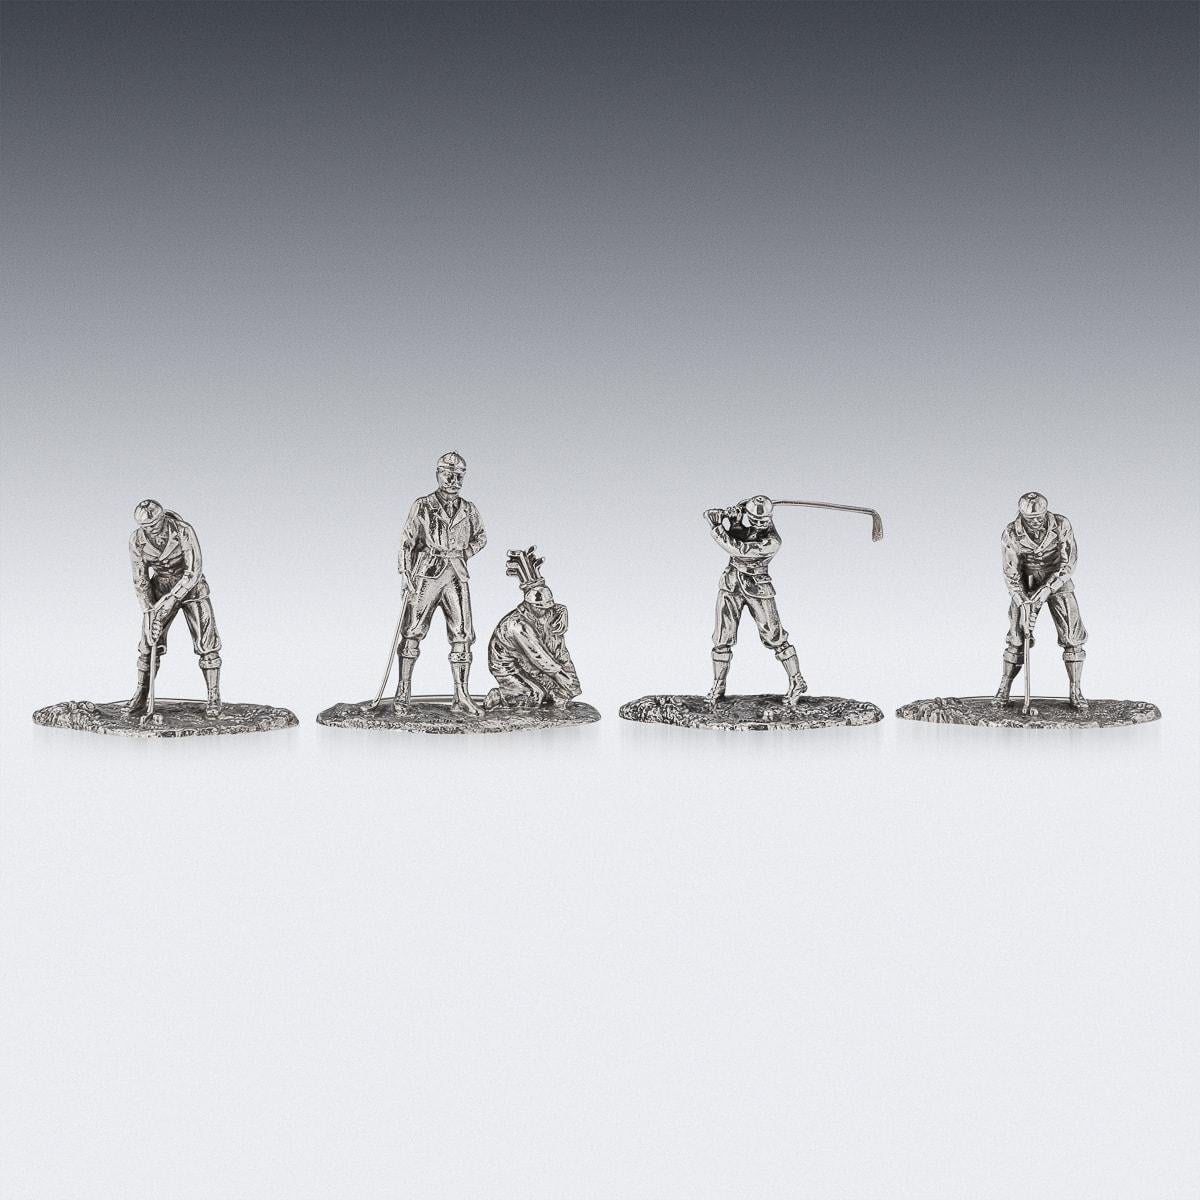 Antique late 19th Century Victorian very rare solid silver set of four menu holders, each holder modelled as golf players. Each menu holder is Hallmarked English silver (925 Standard), London, year 1896 - 1897 (a & b), Maker's mark GC (George